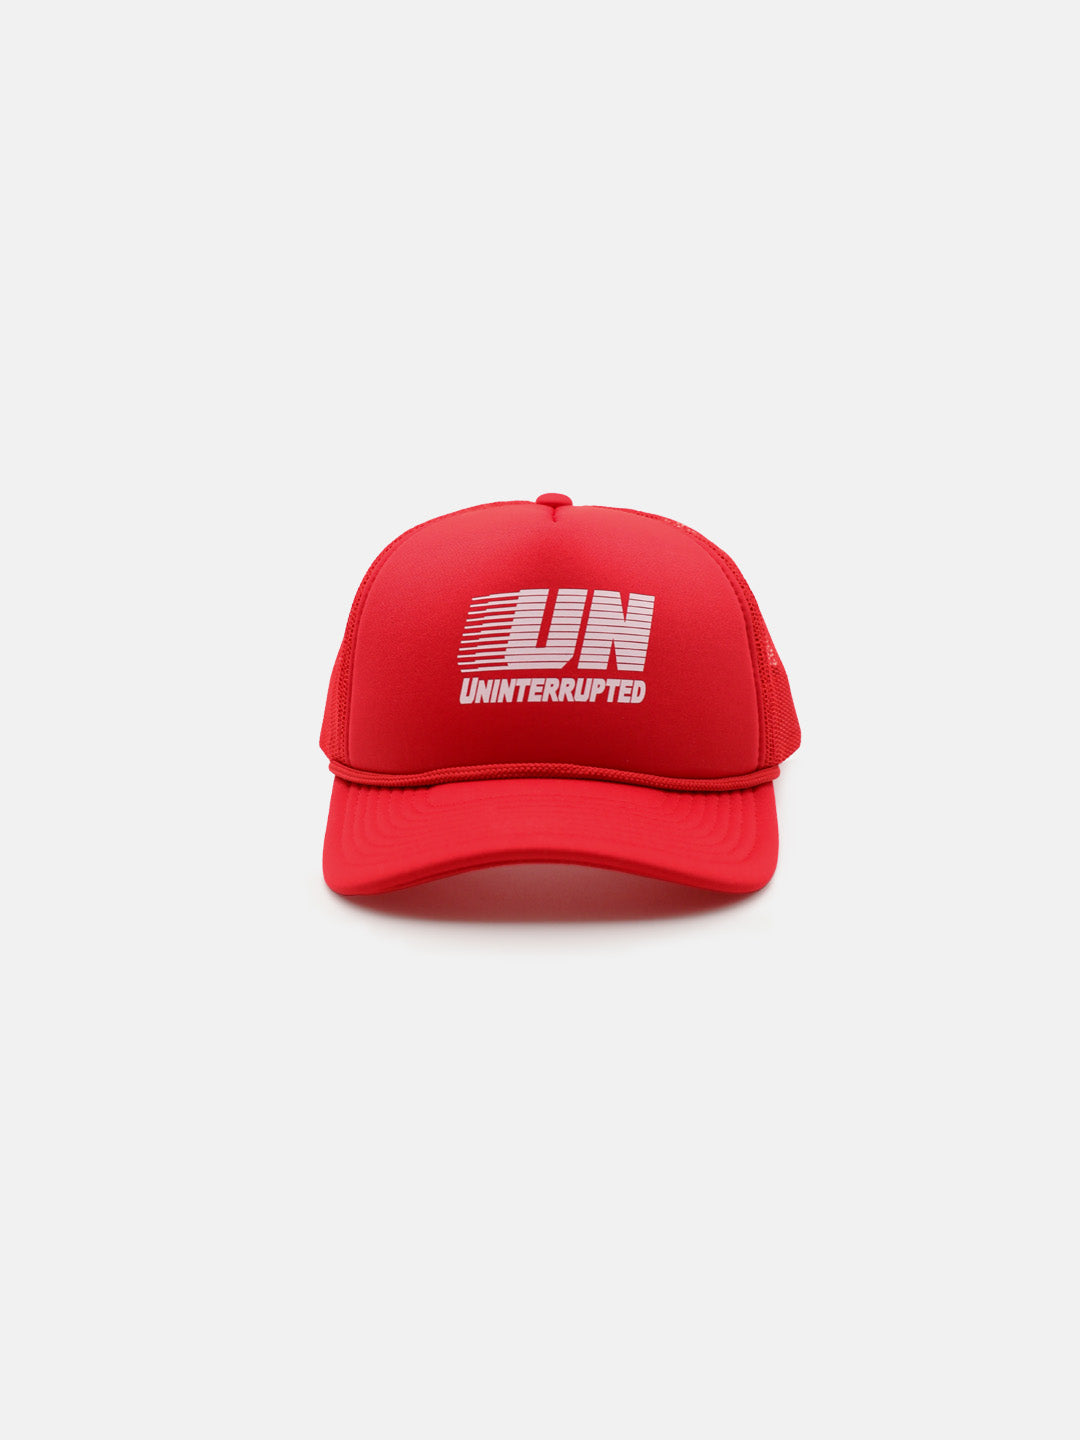 UN Motion Snapback Trucker Hat Red - Front